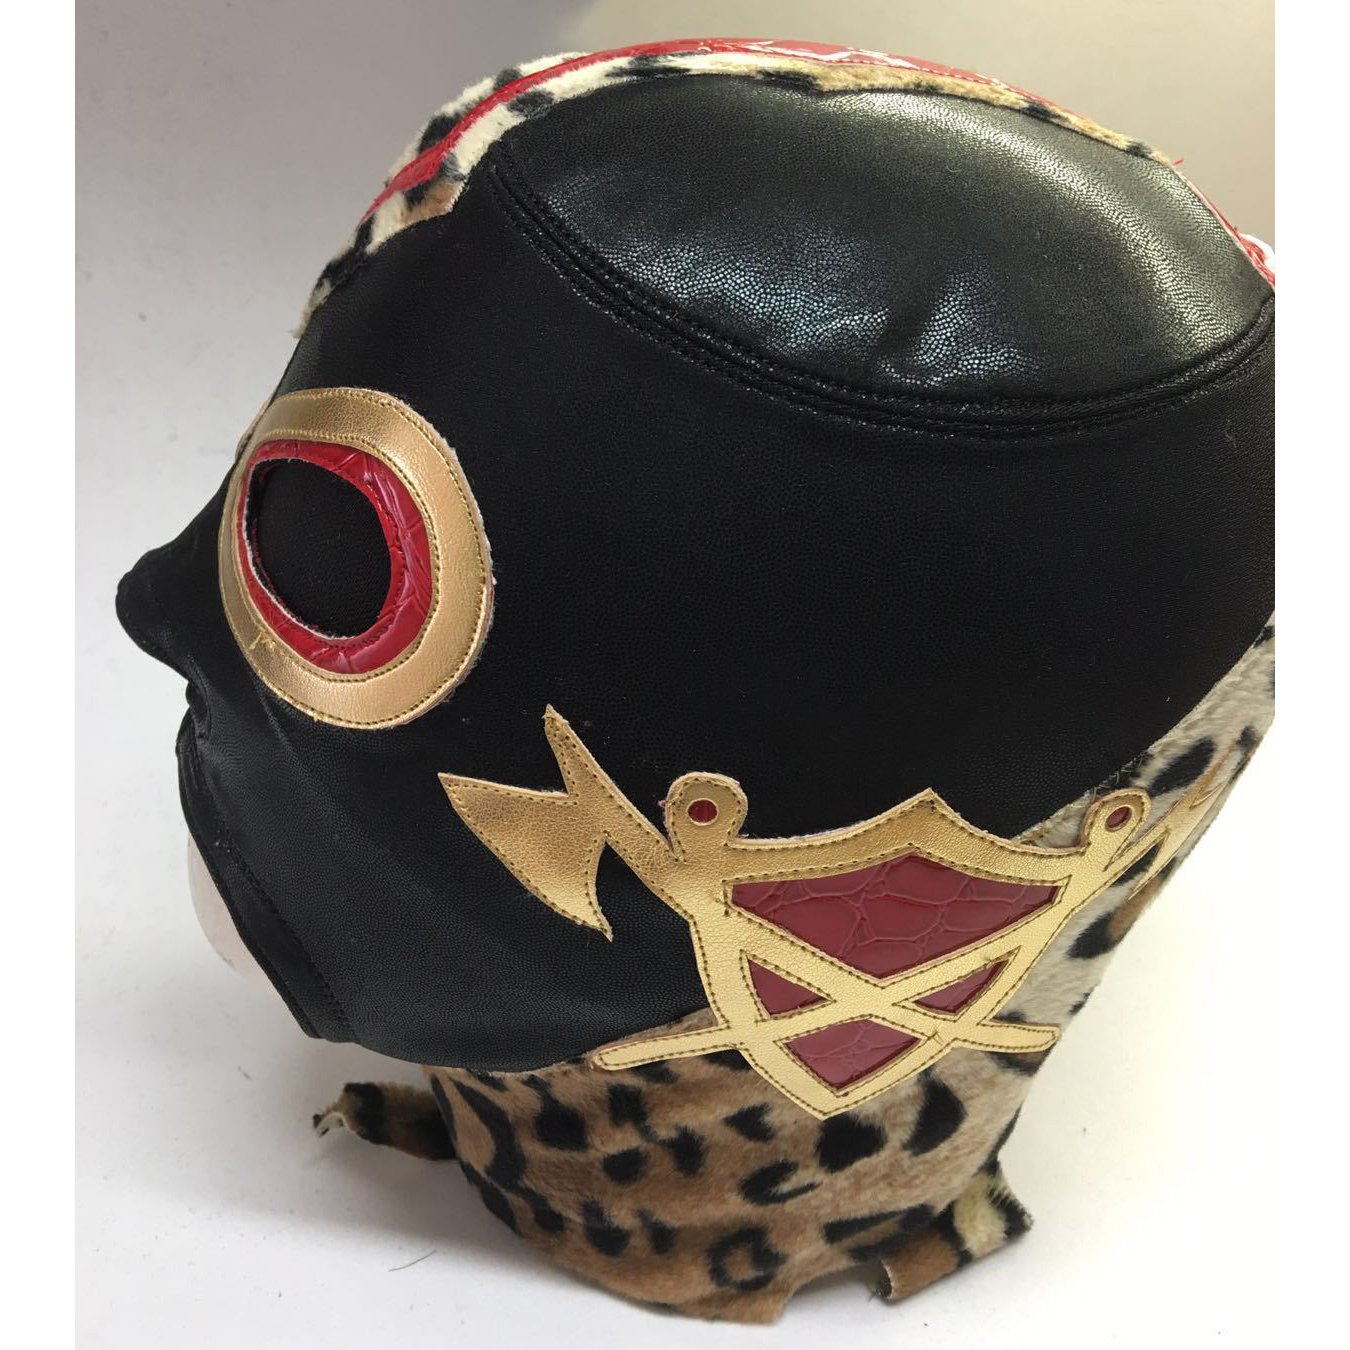 Image of Konnan - Official Mask with Personalized Autograph (NO COUPON CODES)